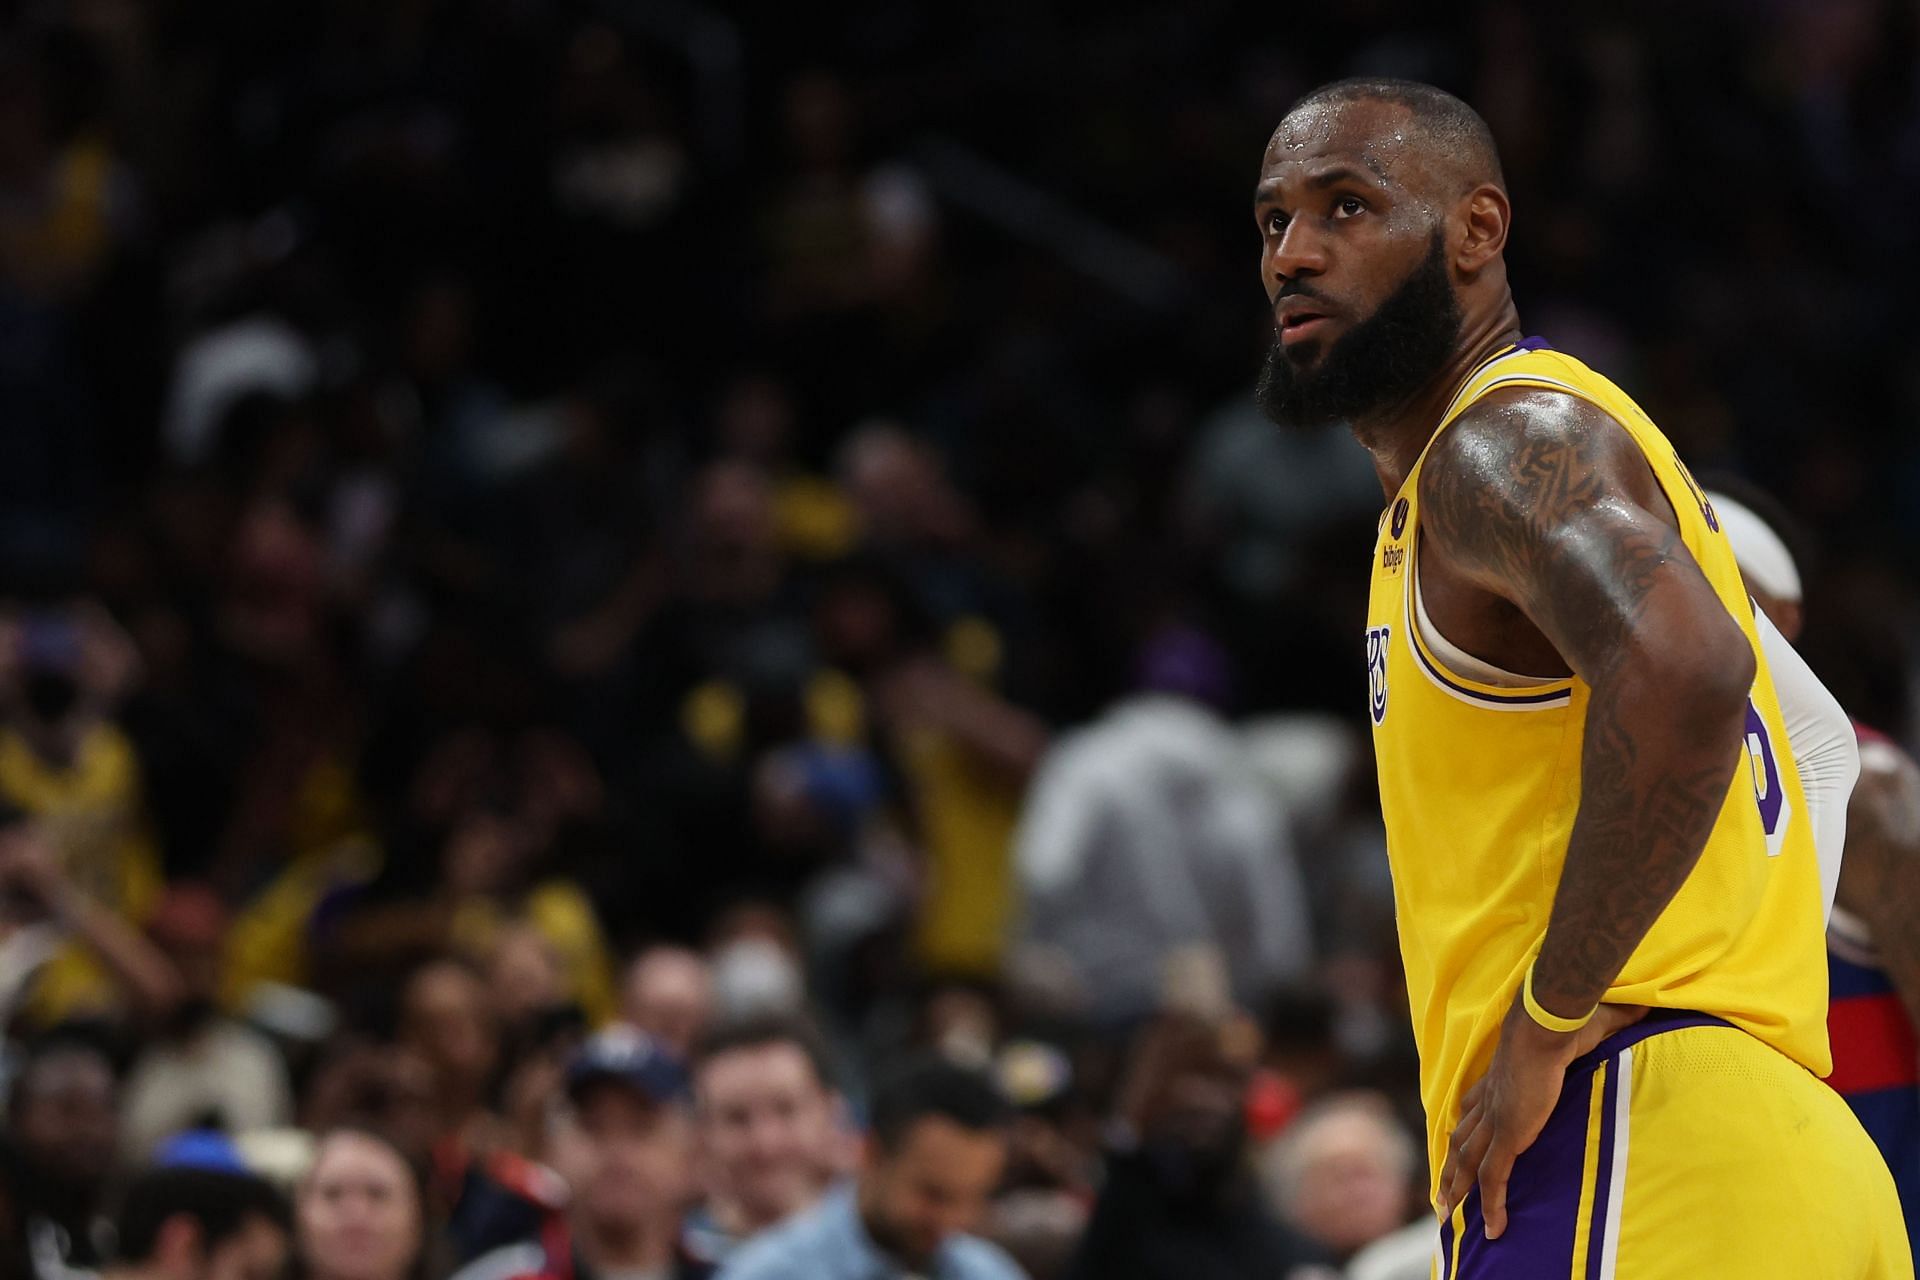 LeBron James #6 of the Los Angeles Lakers reacts after scoring against the Washington Wizards during the second quarter at Capital One Arena on March 19, 2022 in Washington, DC. With the point, LeBron James passed Karl Malone to become second on the NBA&#039;s all-time scoring list.